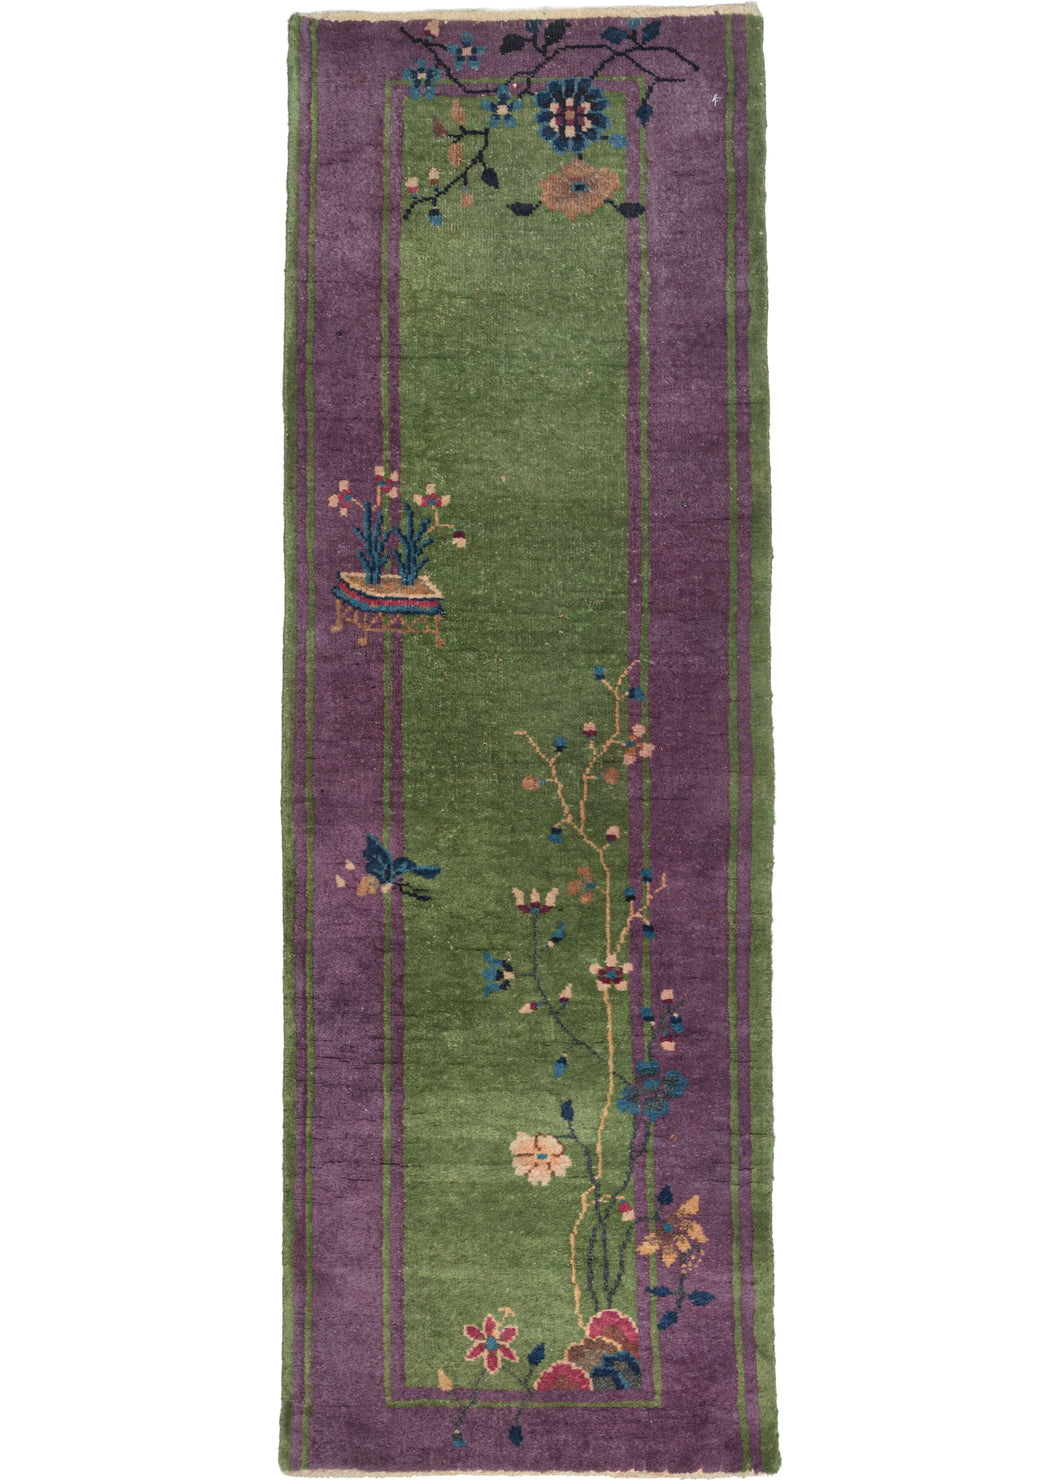 This Purple and Green Deco Runner features a striking and desirable contrast of a rich green ground encapsulated by a regal purple border. Various vegetation including a small flowering tree and flowers in a plant holder pays no mind to the barrier between border and field giving this piece a feeling that is free and unrestrained. In a hard-to-find short and narrow runner format.